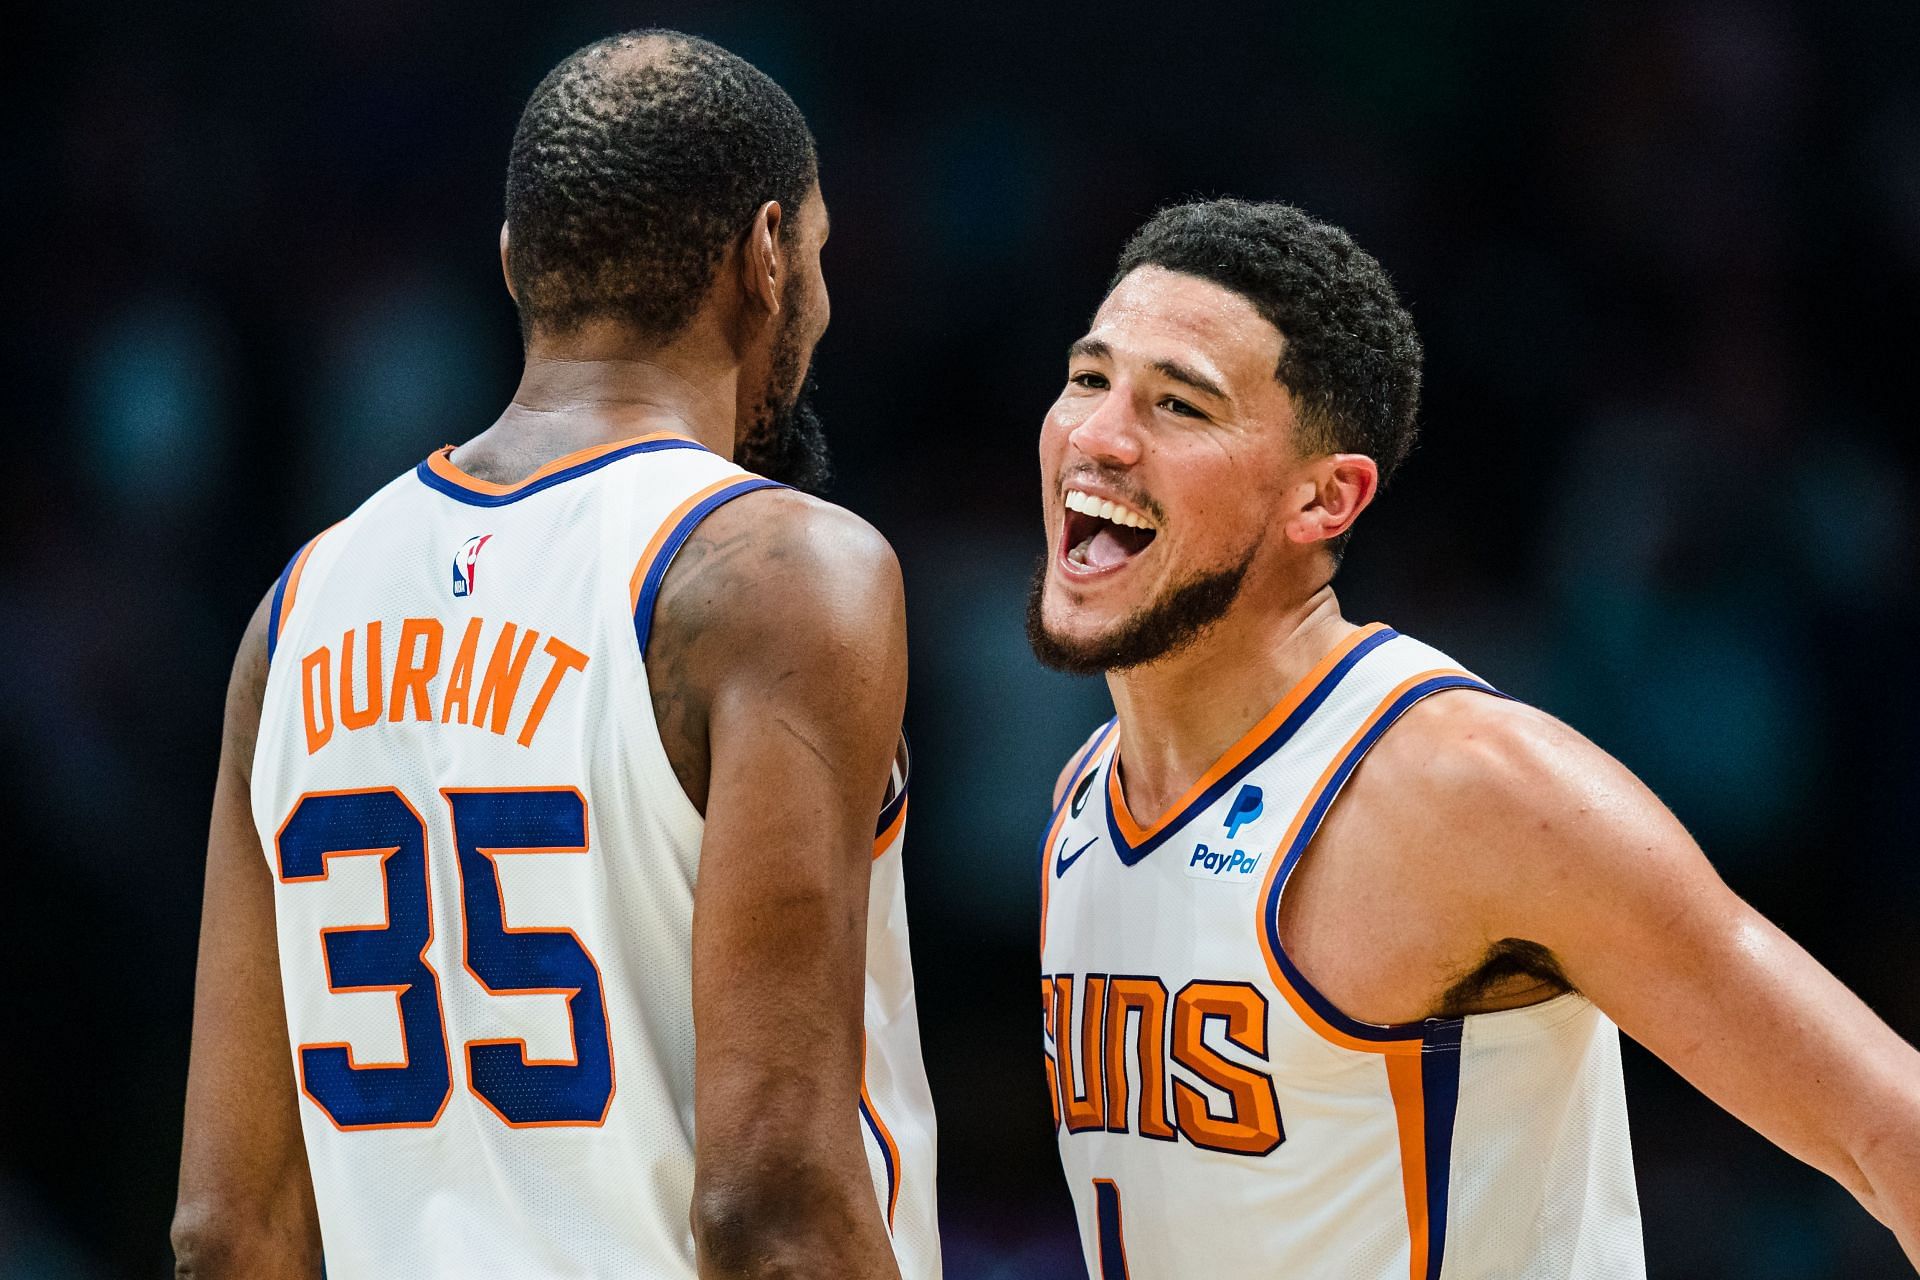 Phoenix Suns duo Kevin Durant and Devin Booker celebrate winning against the Charlotte Hornets